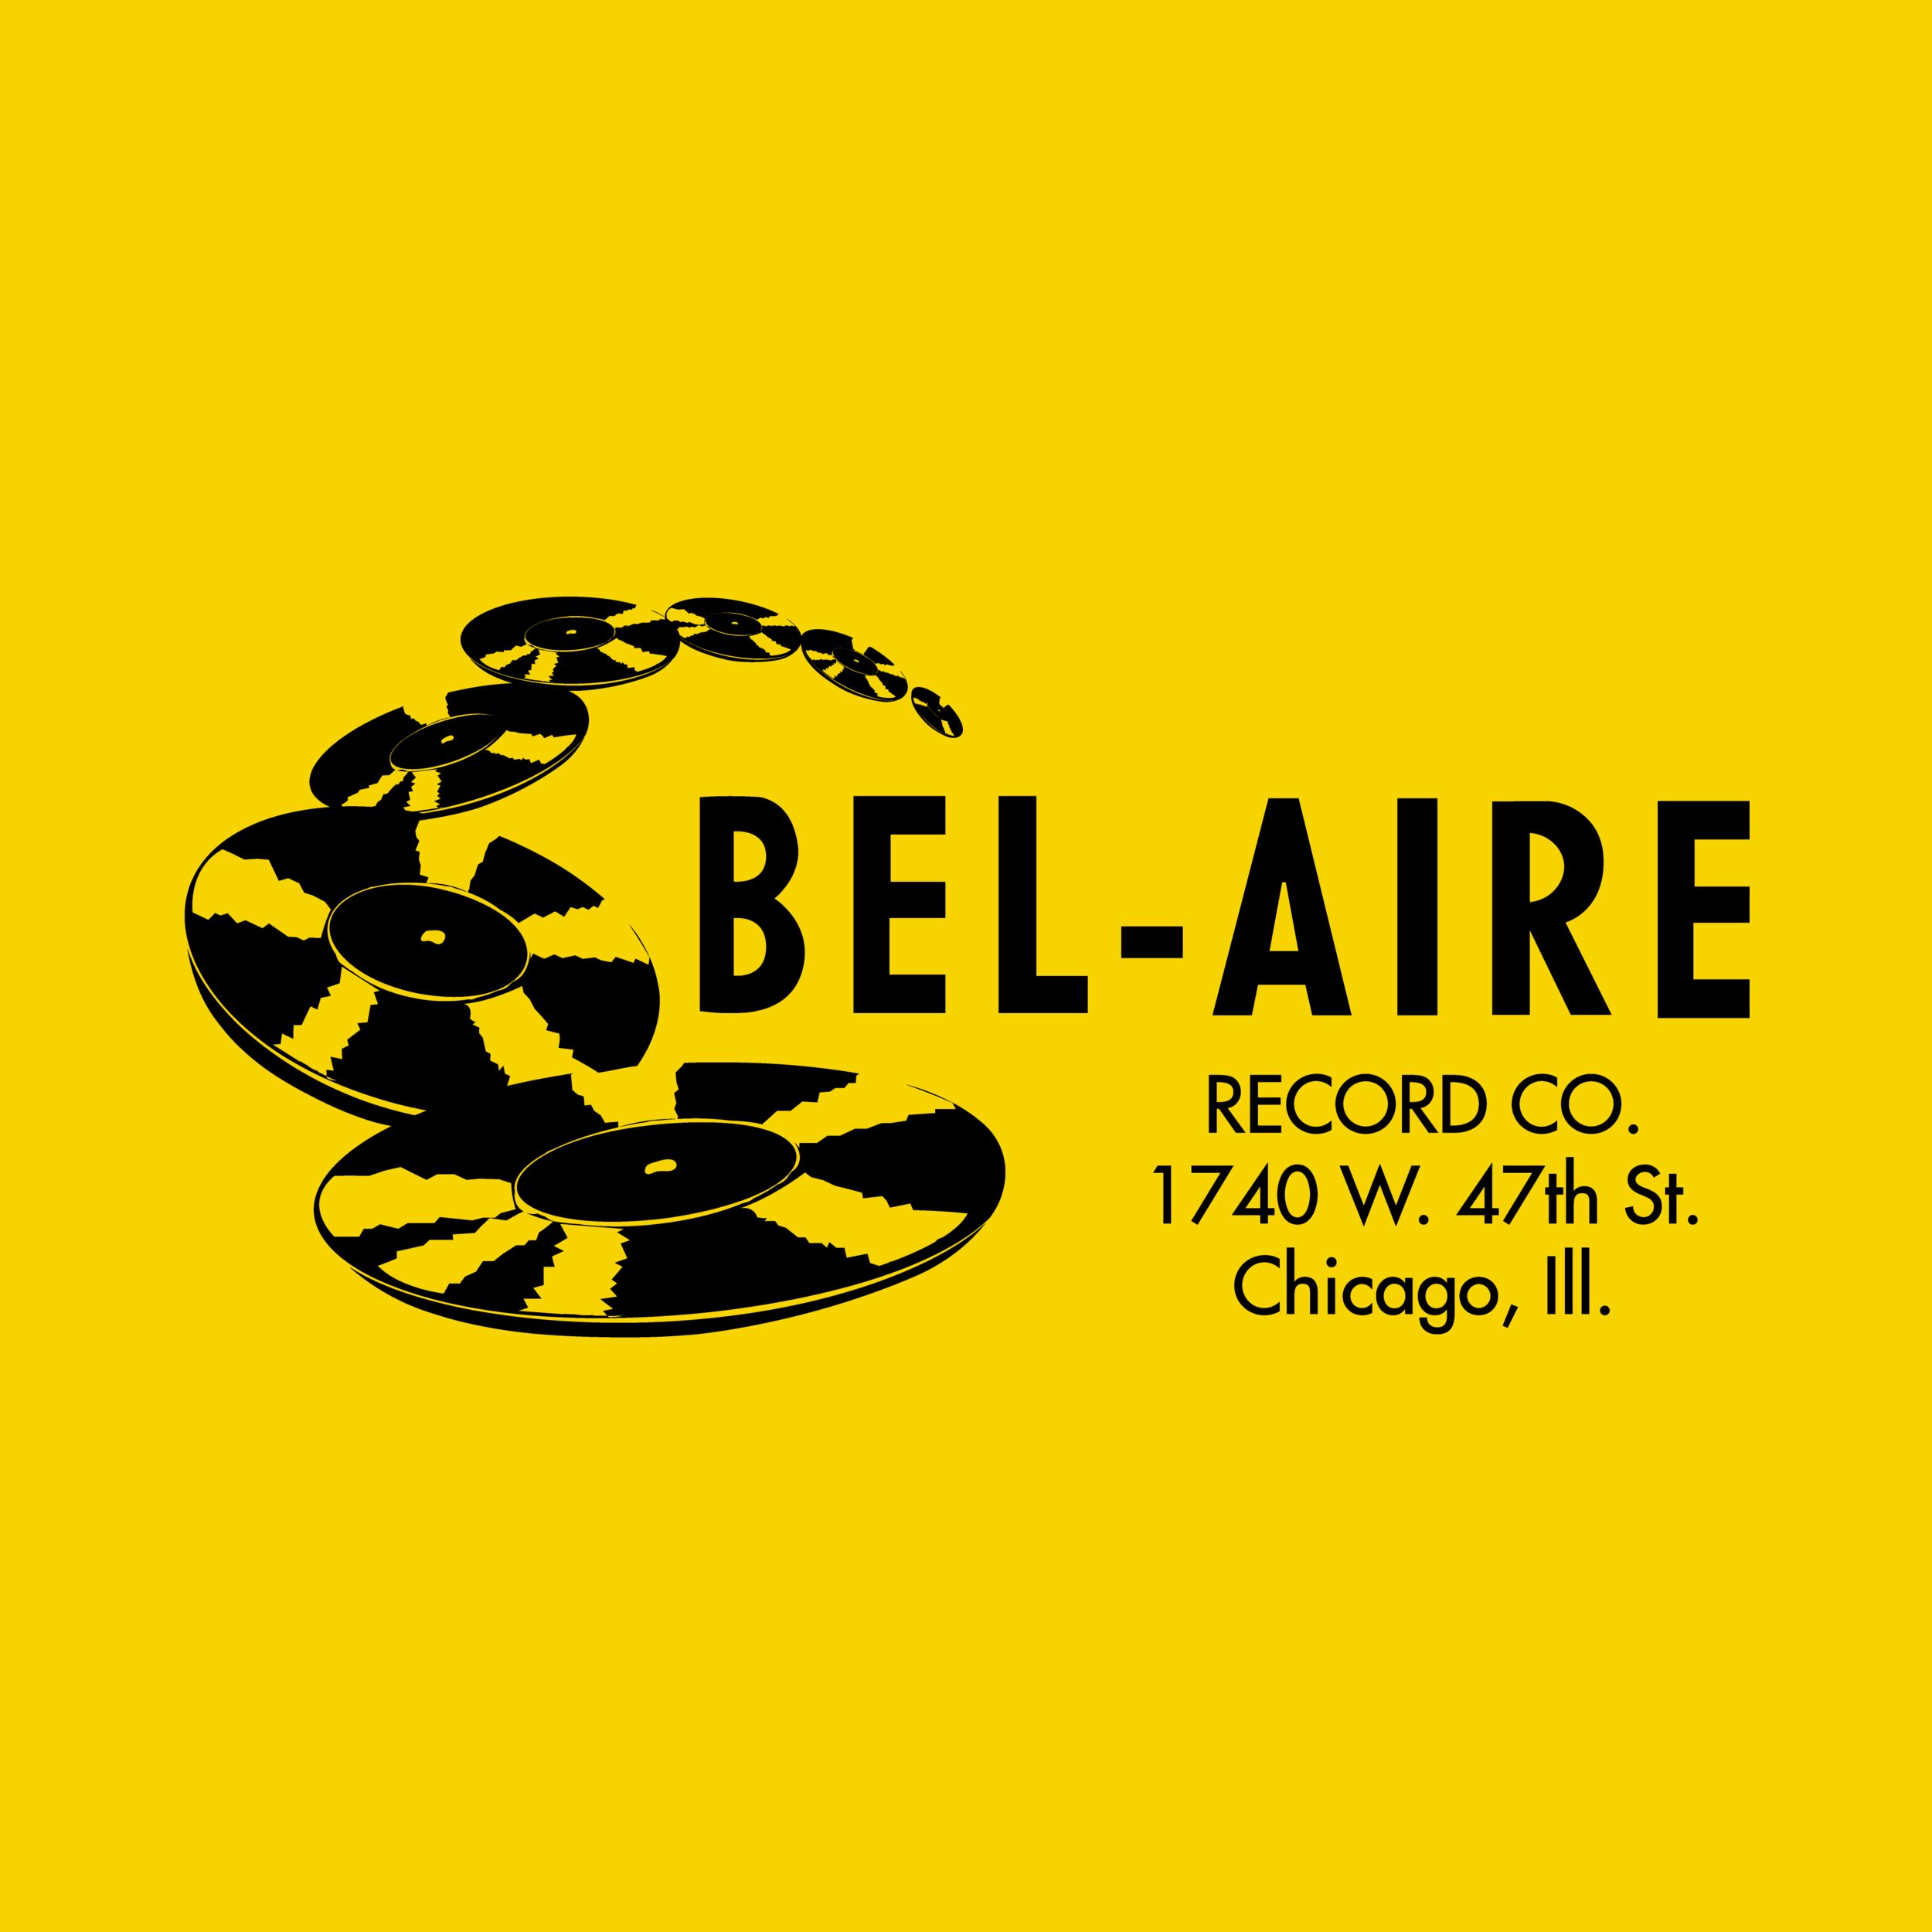 Bel-aire-01.png